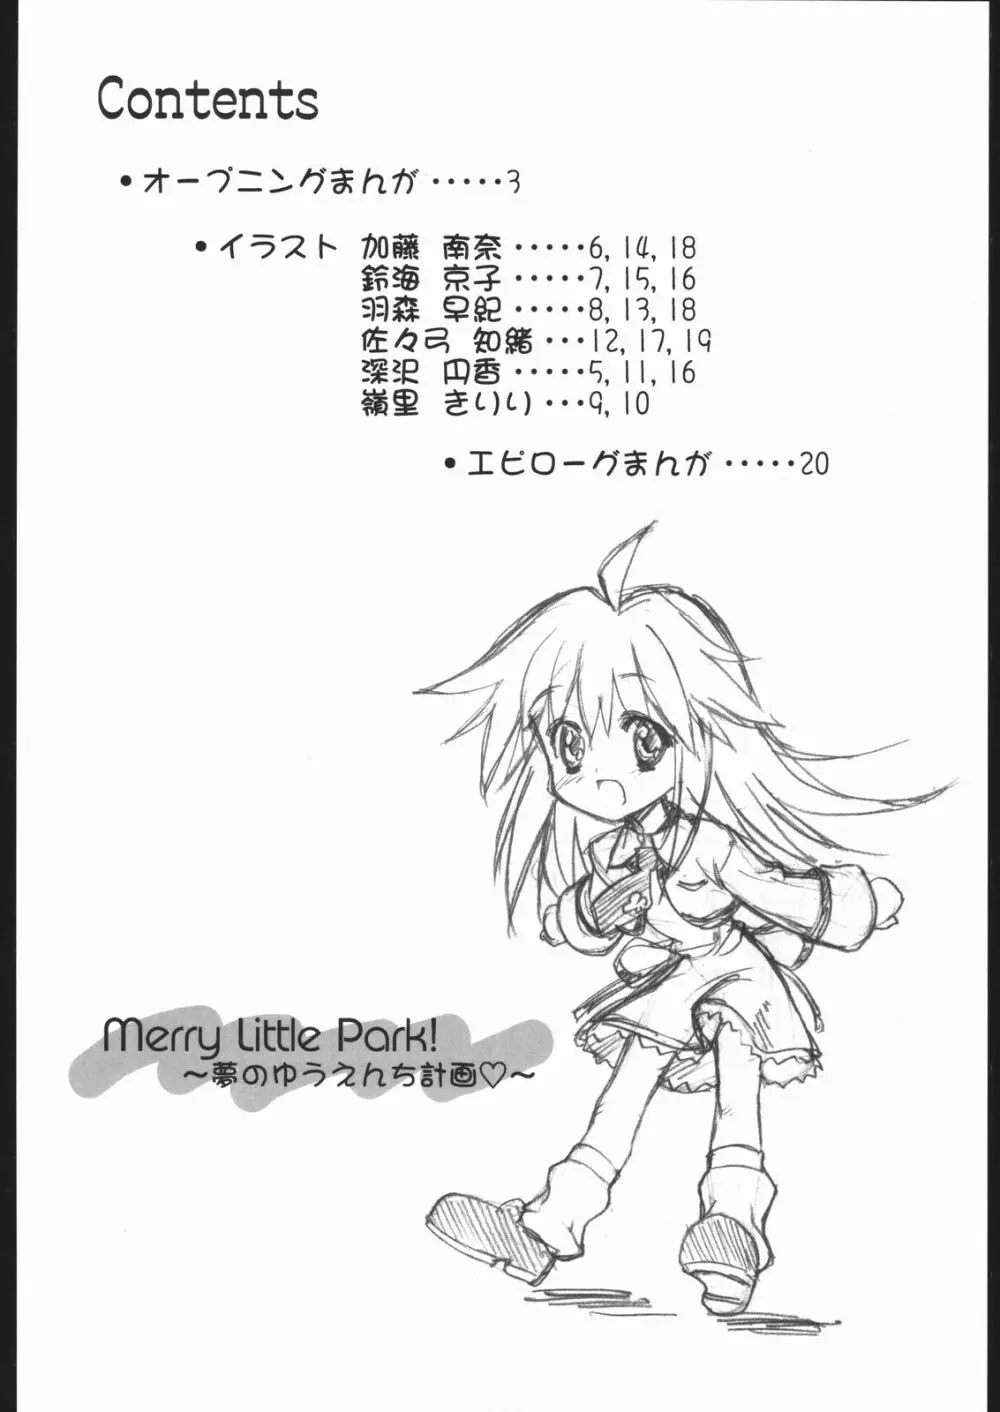 Merry Little Park! ～夢のゆうえんち計画～ Page.3